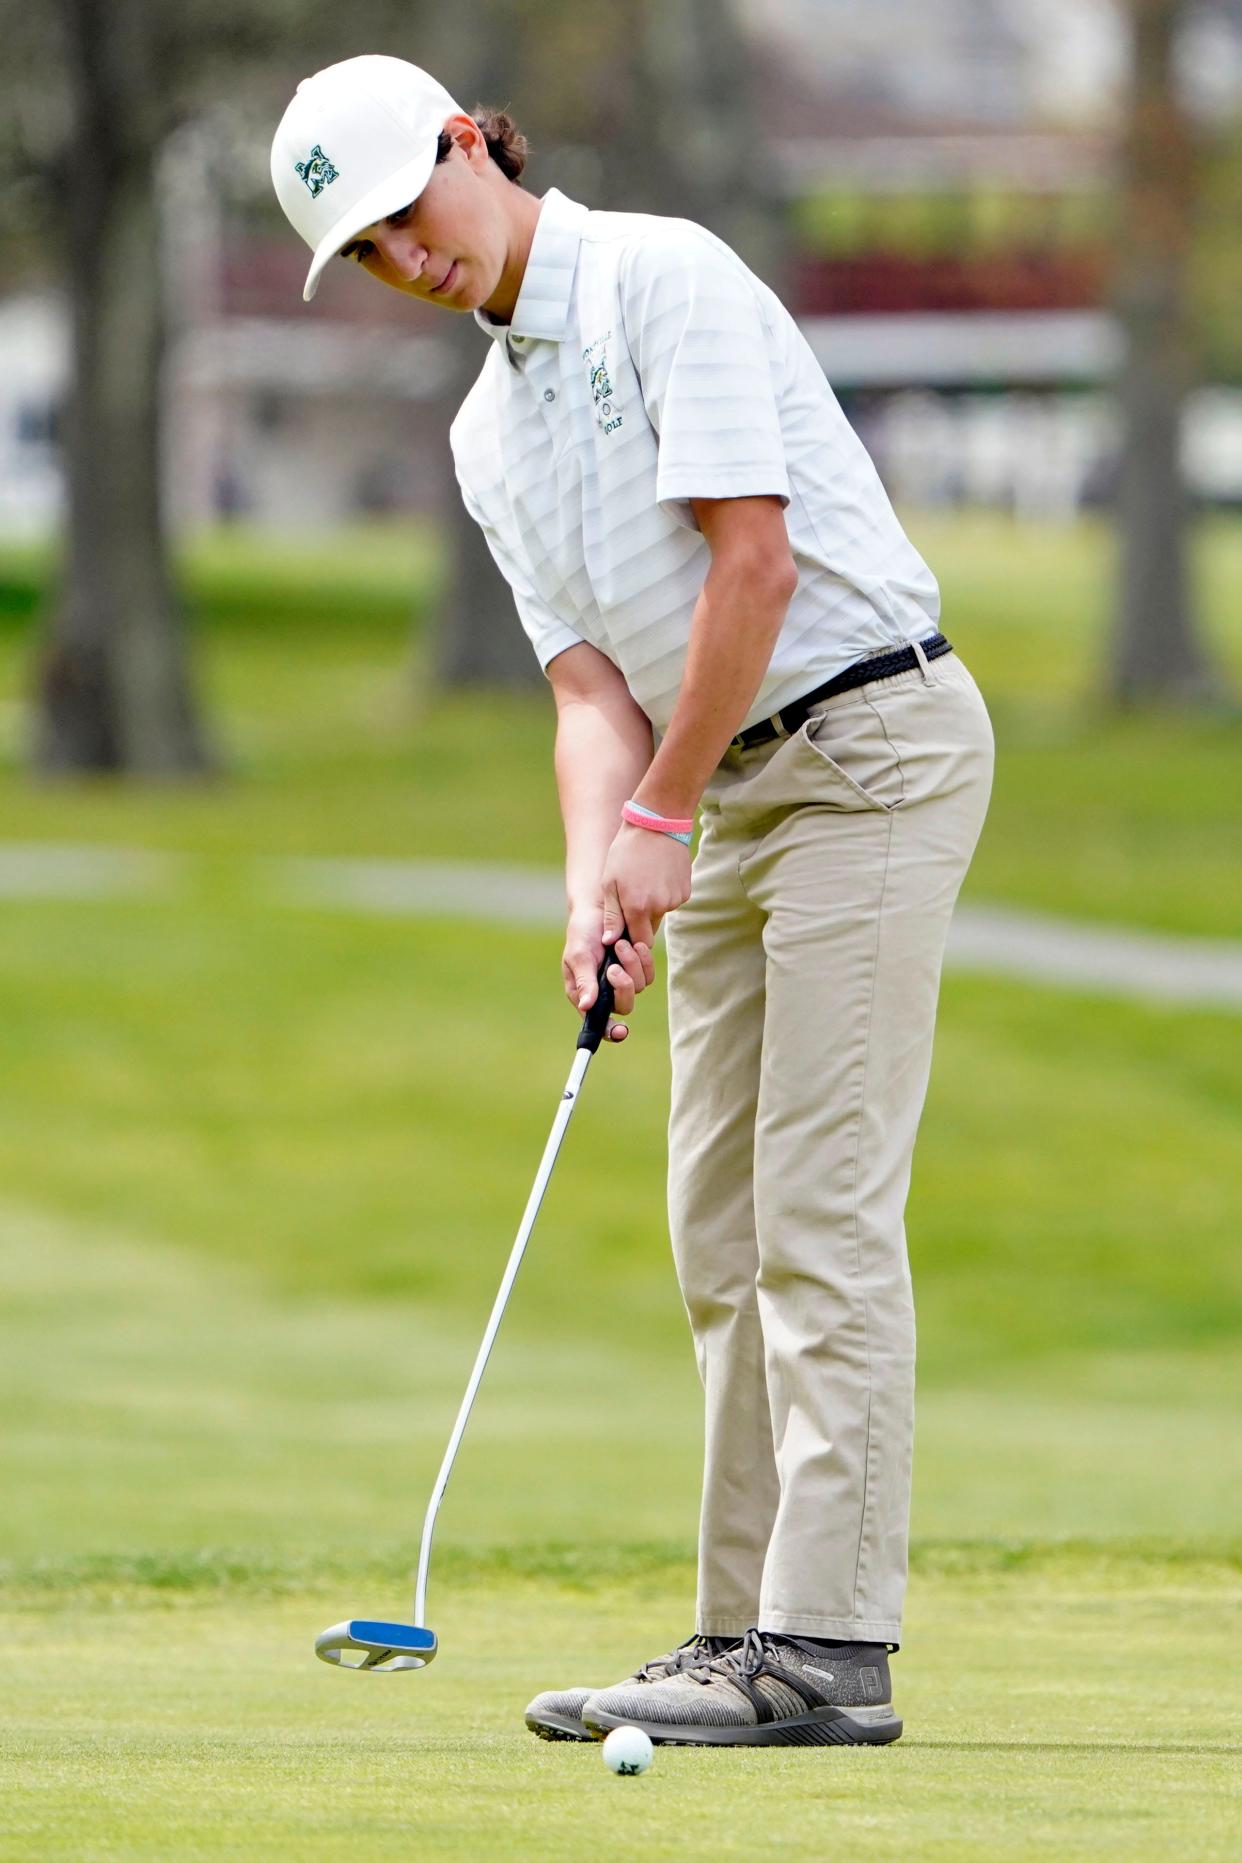 Eli Kaufman of Montville putts on the first green during the Morris County Golf Tournament at Flanders Valley Golf Course on Tuesday, May 3, 2022.